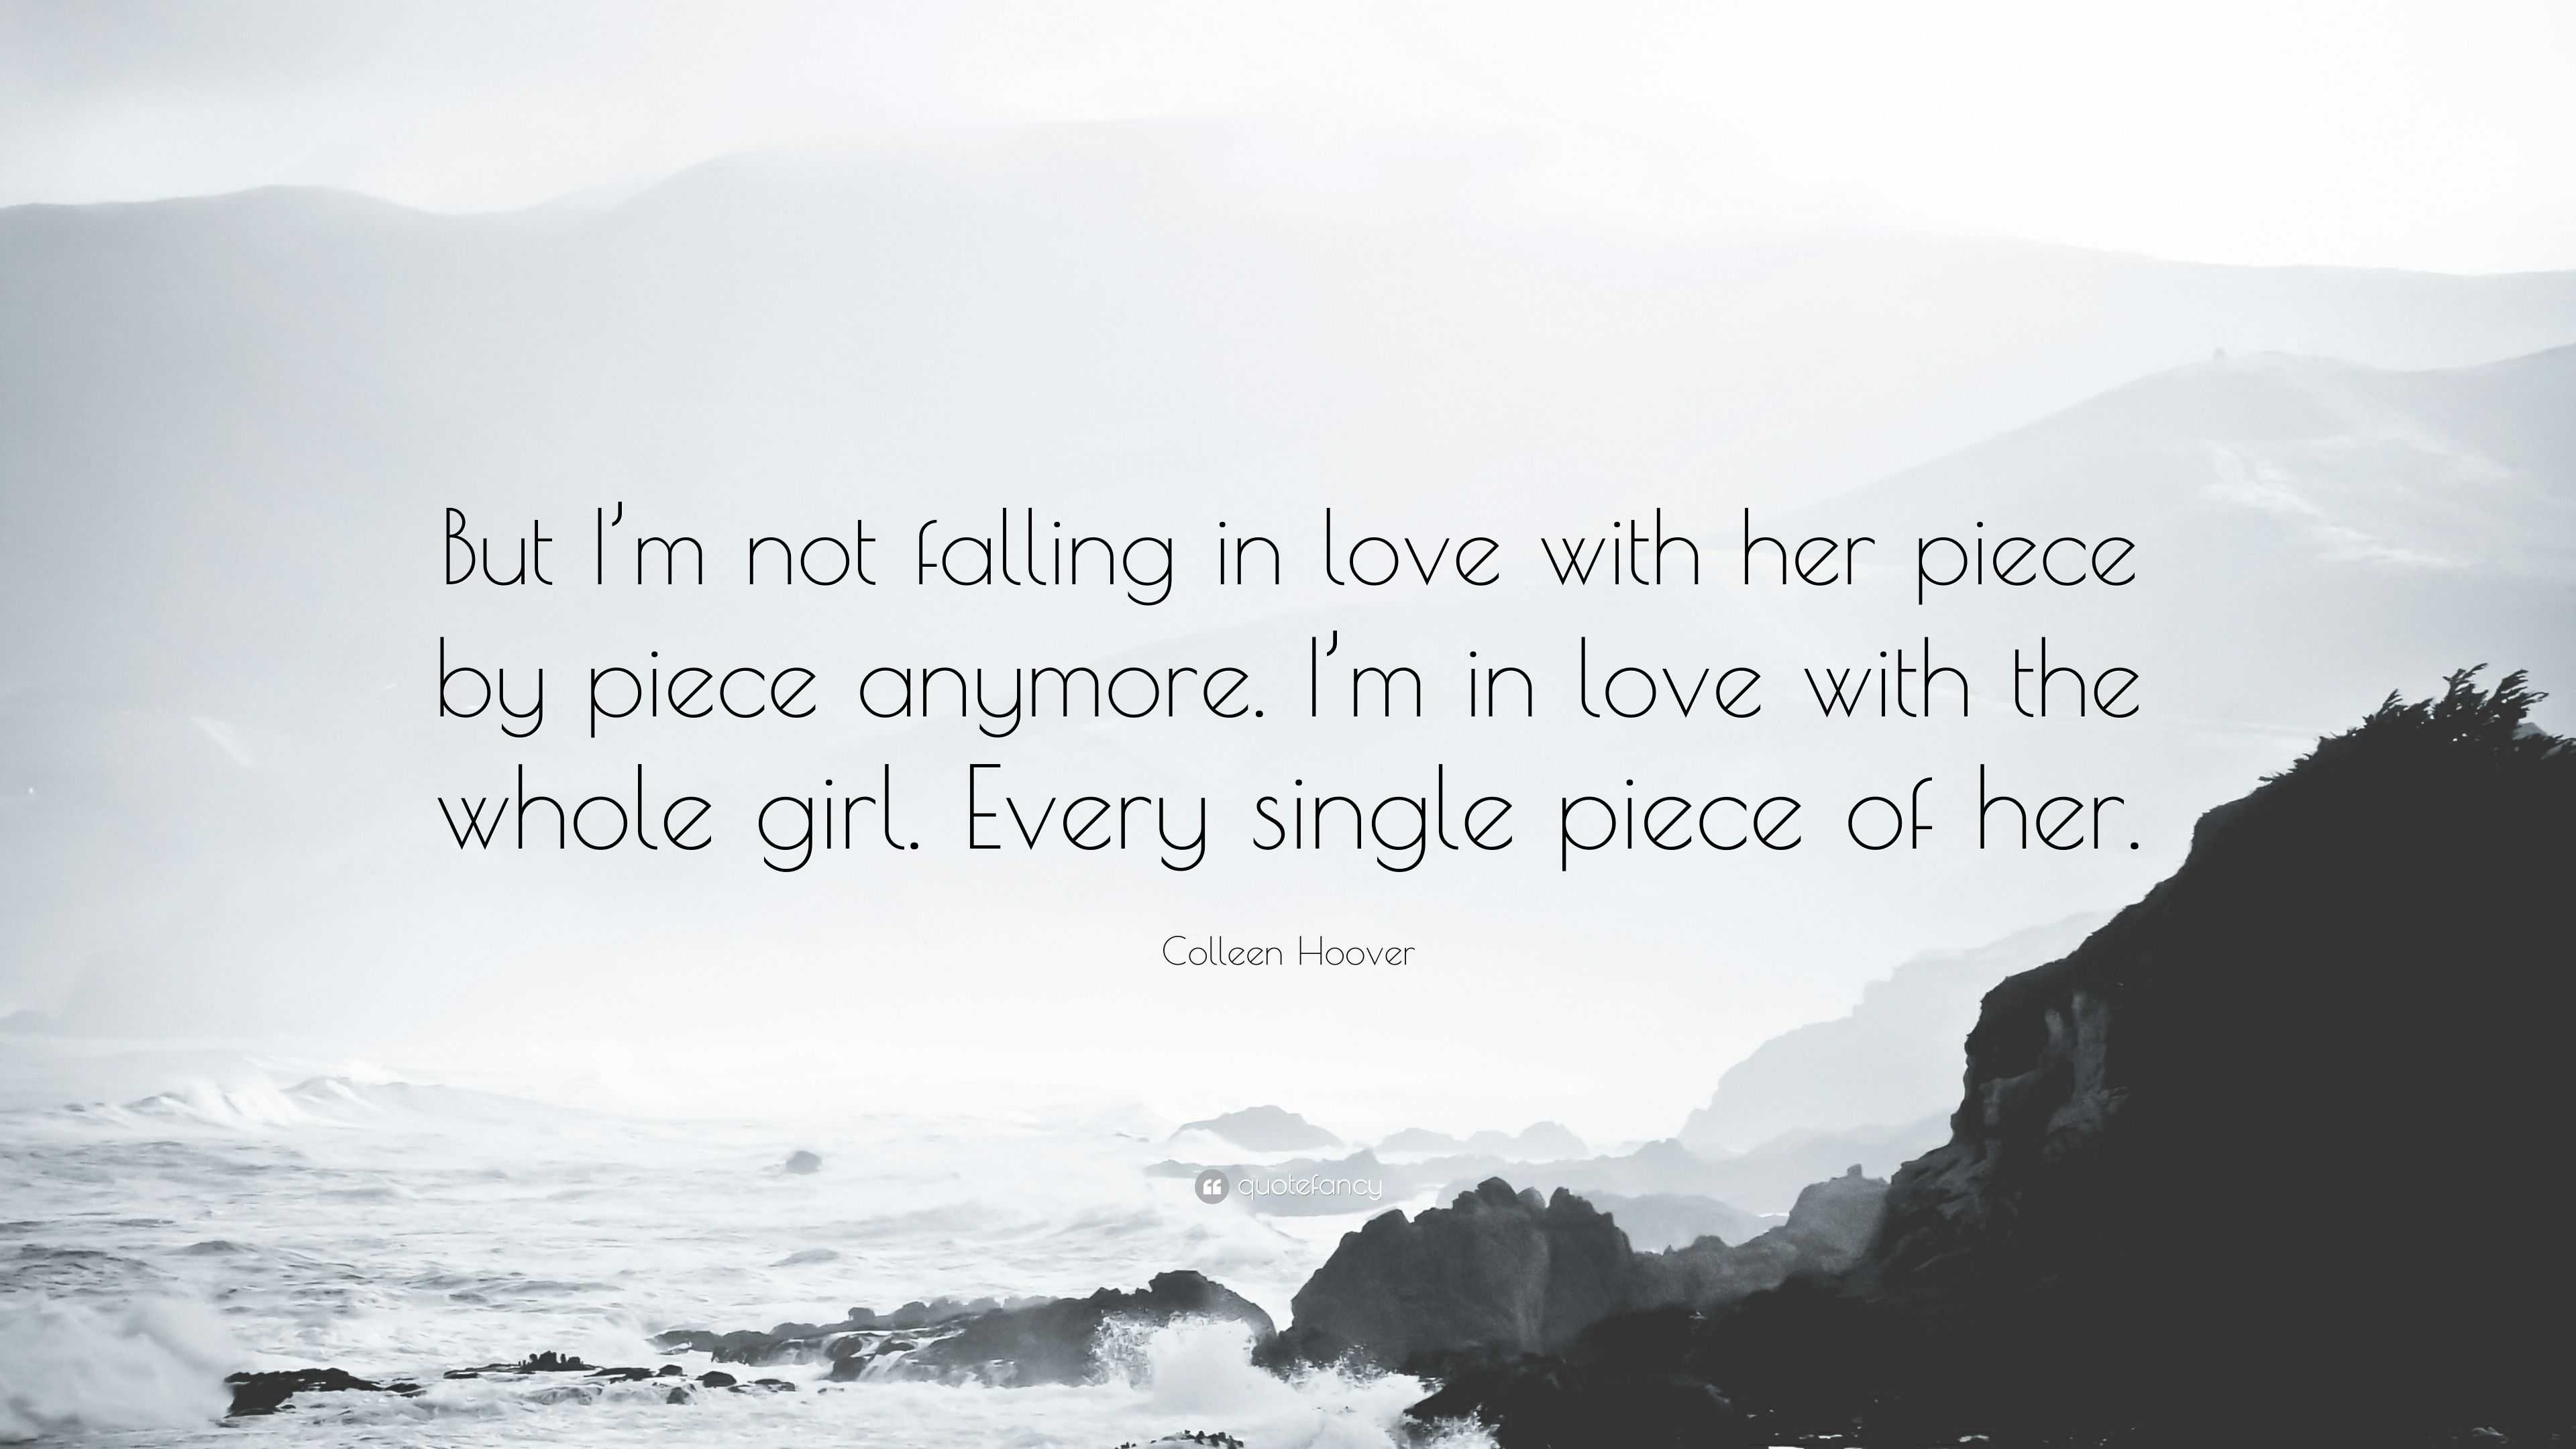 Colleen Hoover Quote “But I m not falling in love with her piece